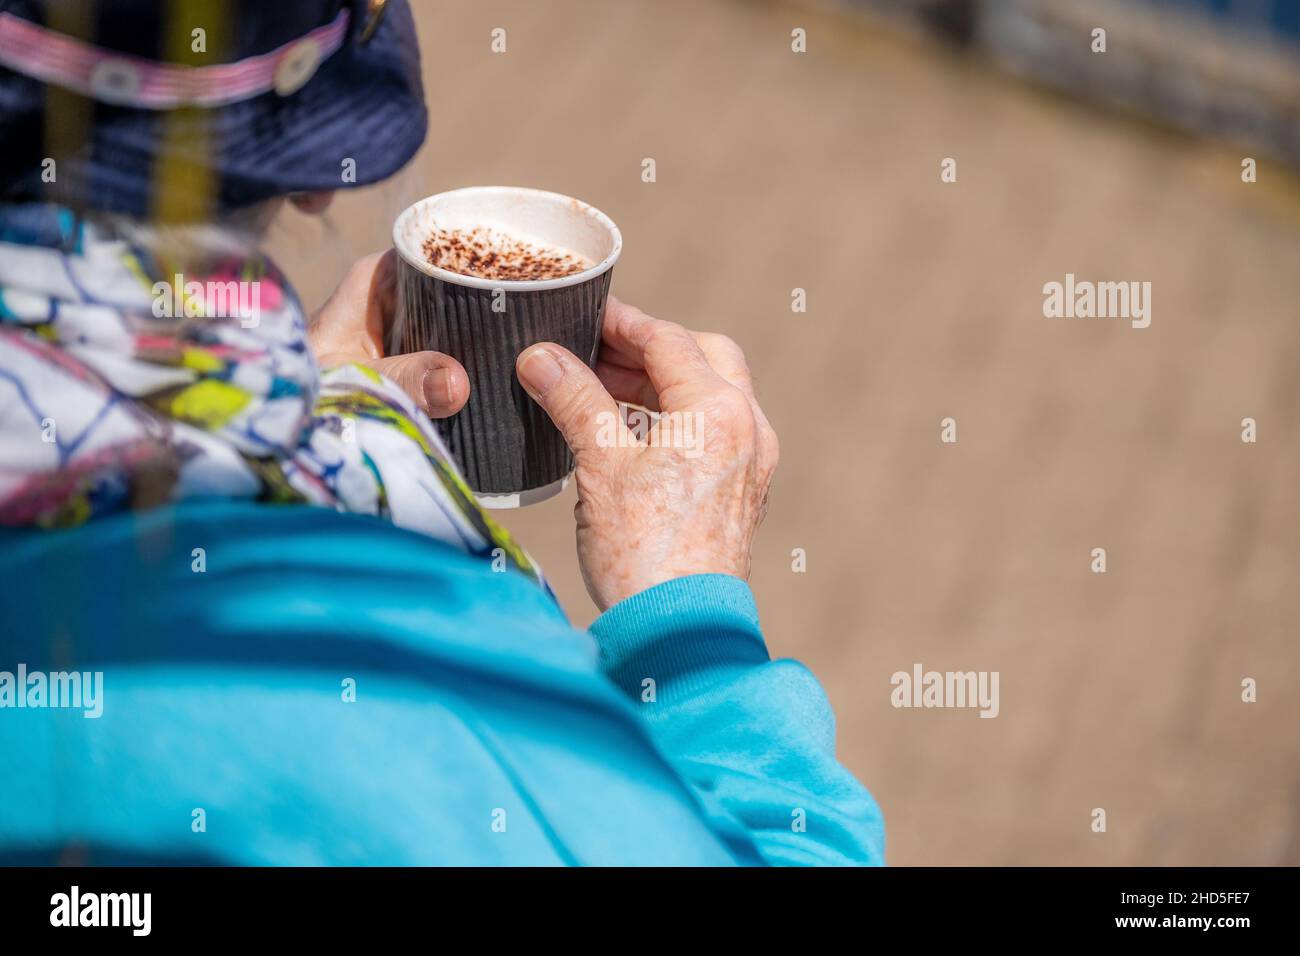 A mature person holding a cappuccino coffee in a disposable cup. Stock Photo